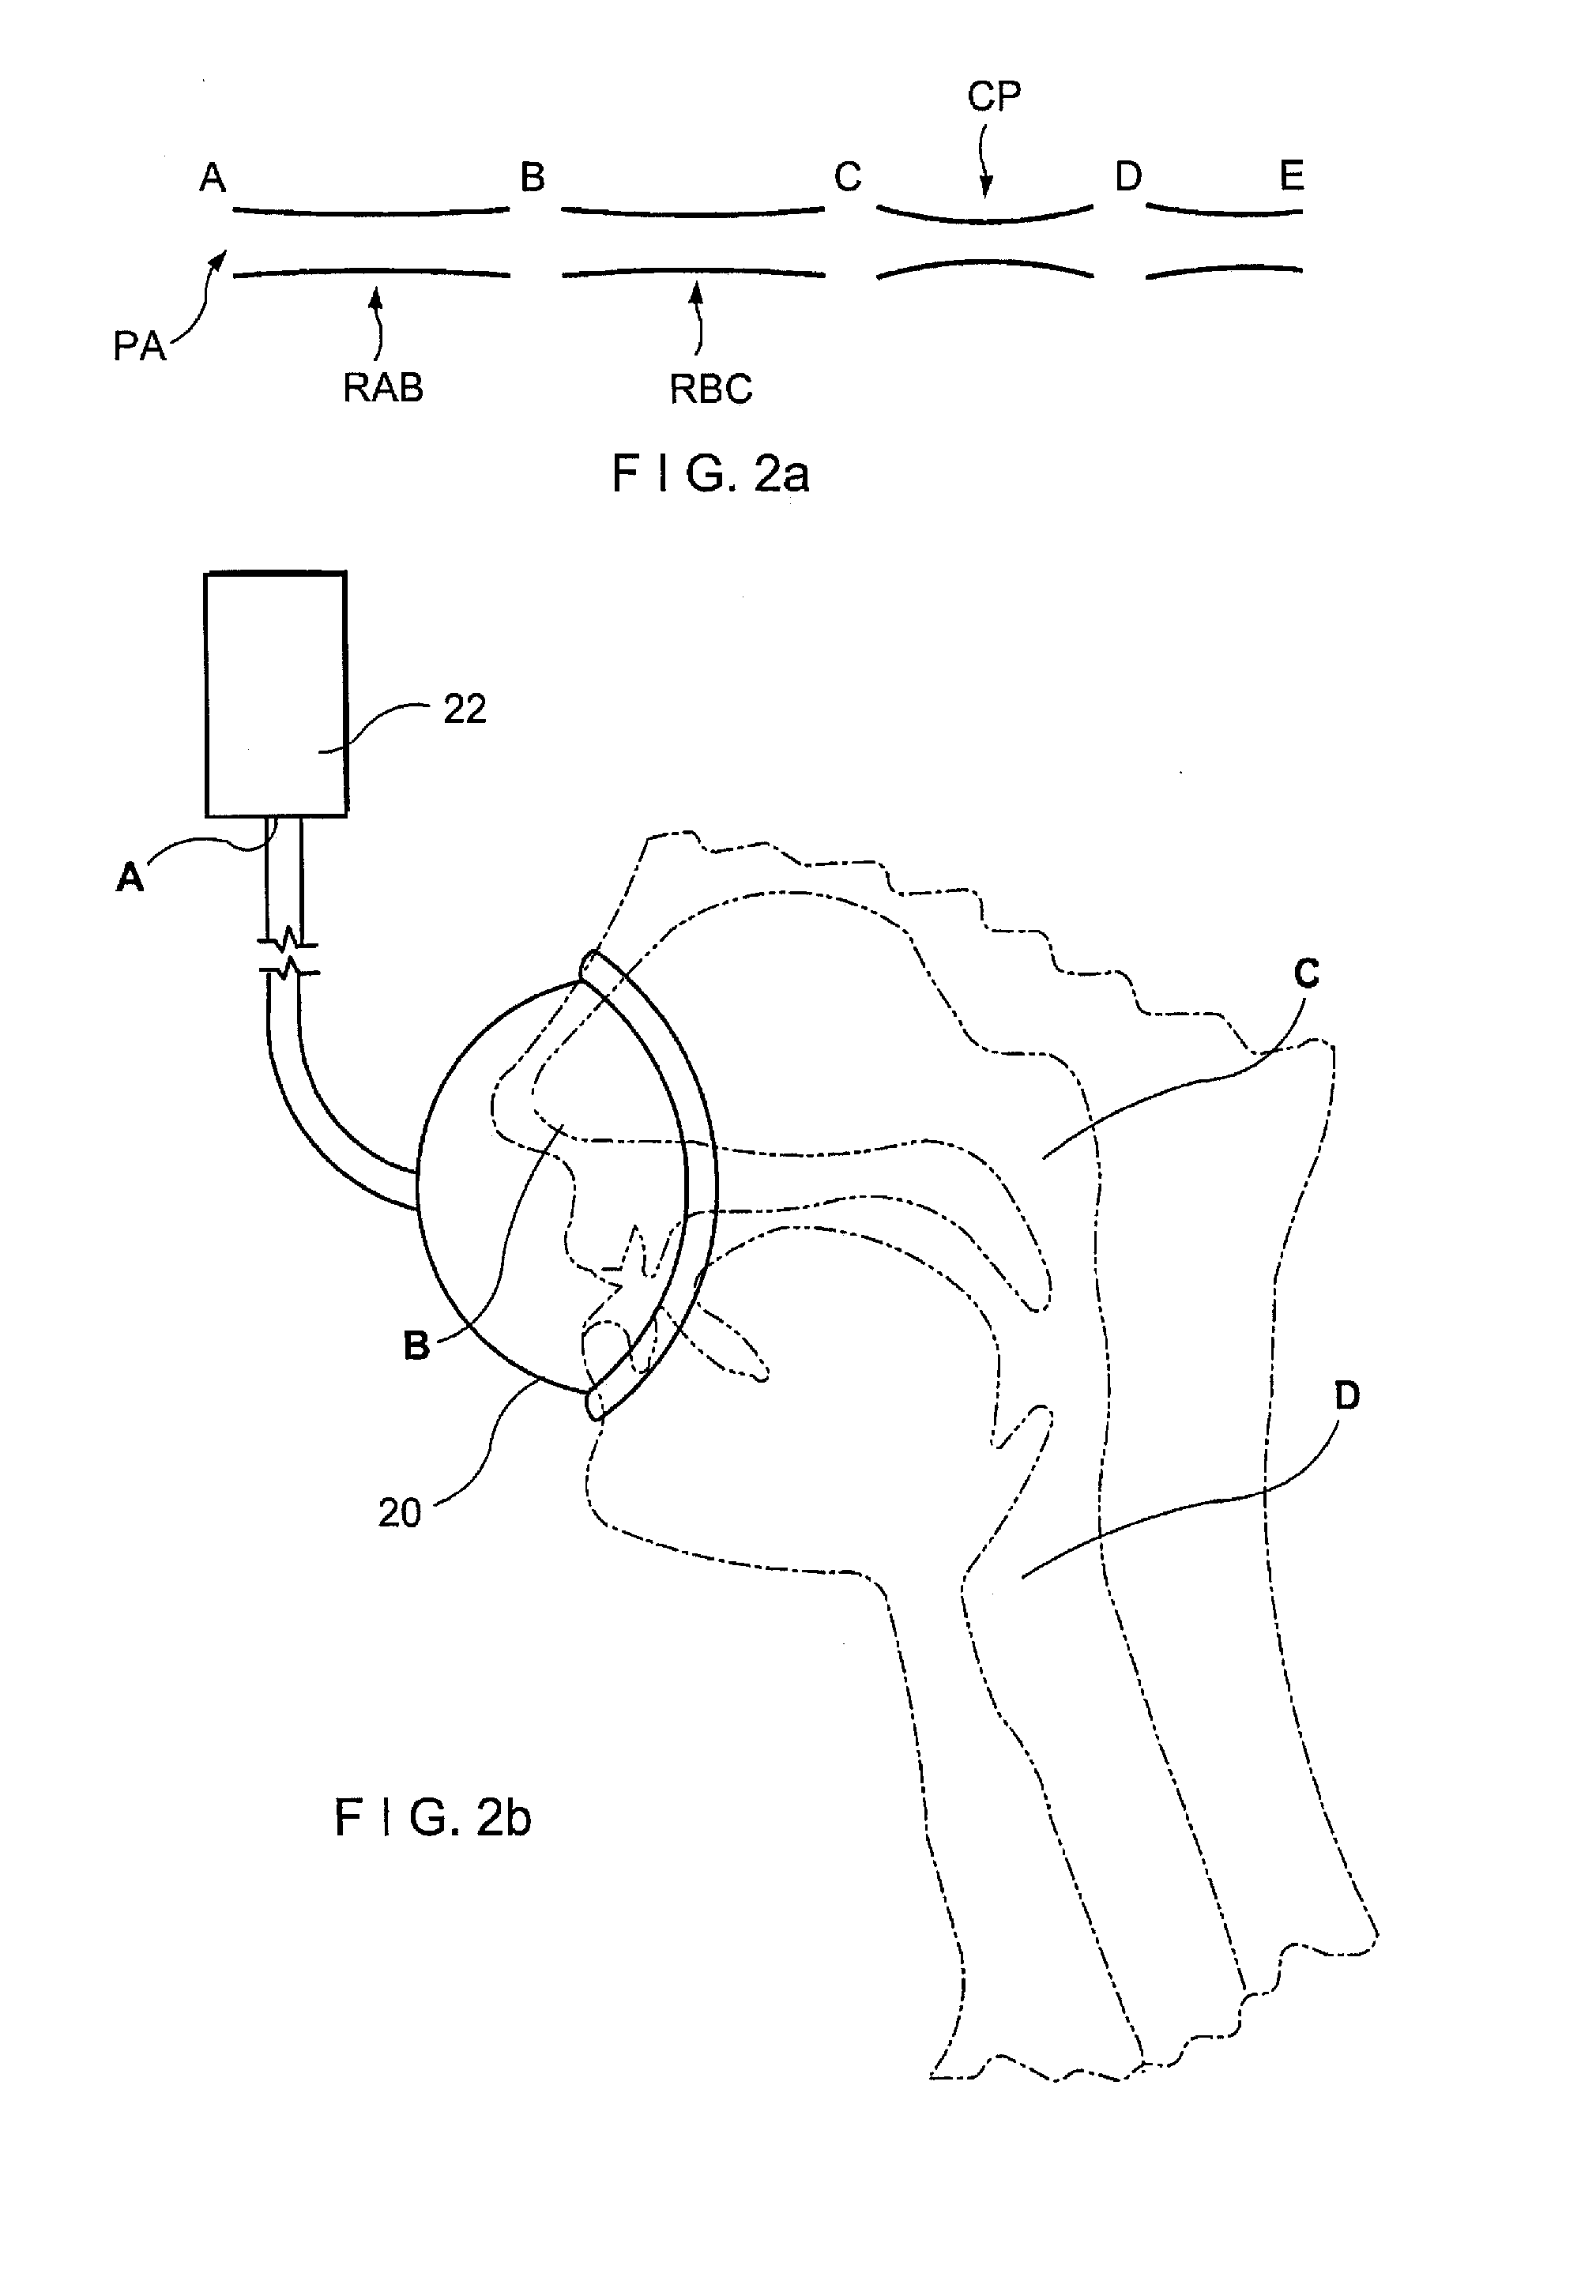 System and Method for Improved Treatment of Sleeping Disorders using Therapeutic Positive Airway Pressure